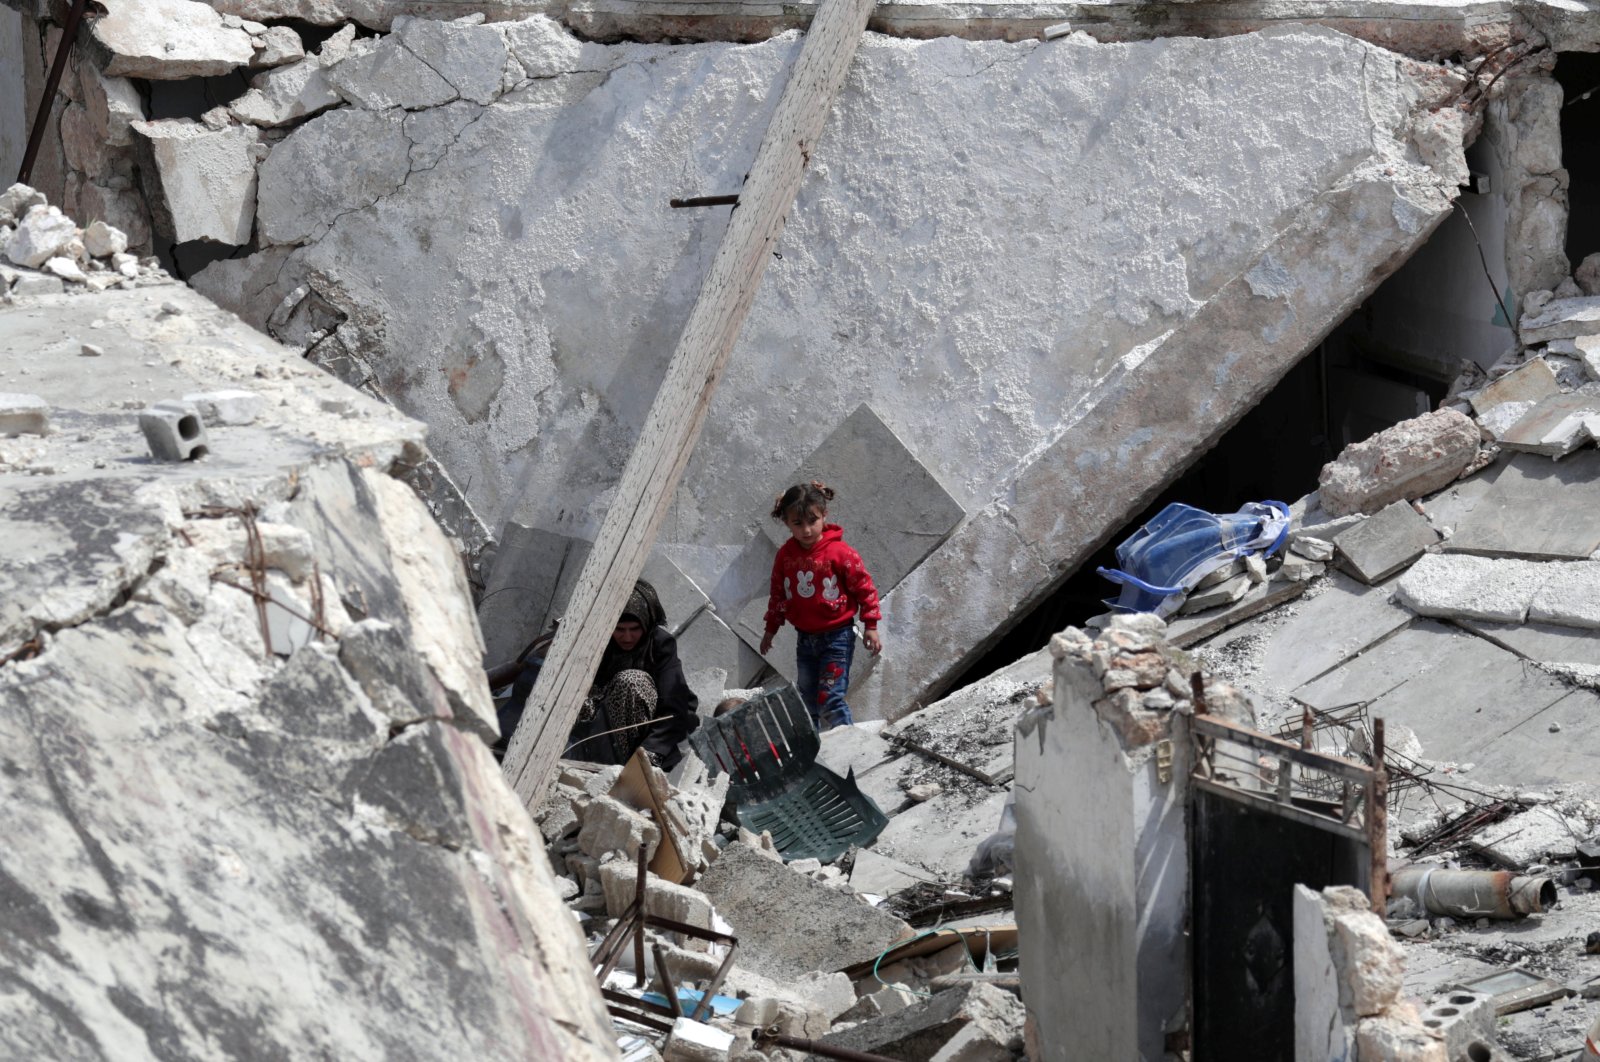 A girl stands near a woman on the rubble of a damaged building in the opposition-held town of Nairab, in northwest Syria’s Idlib region, Syria April 17, 2020. REUTERS